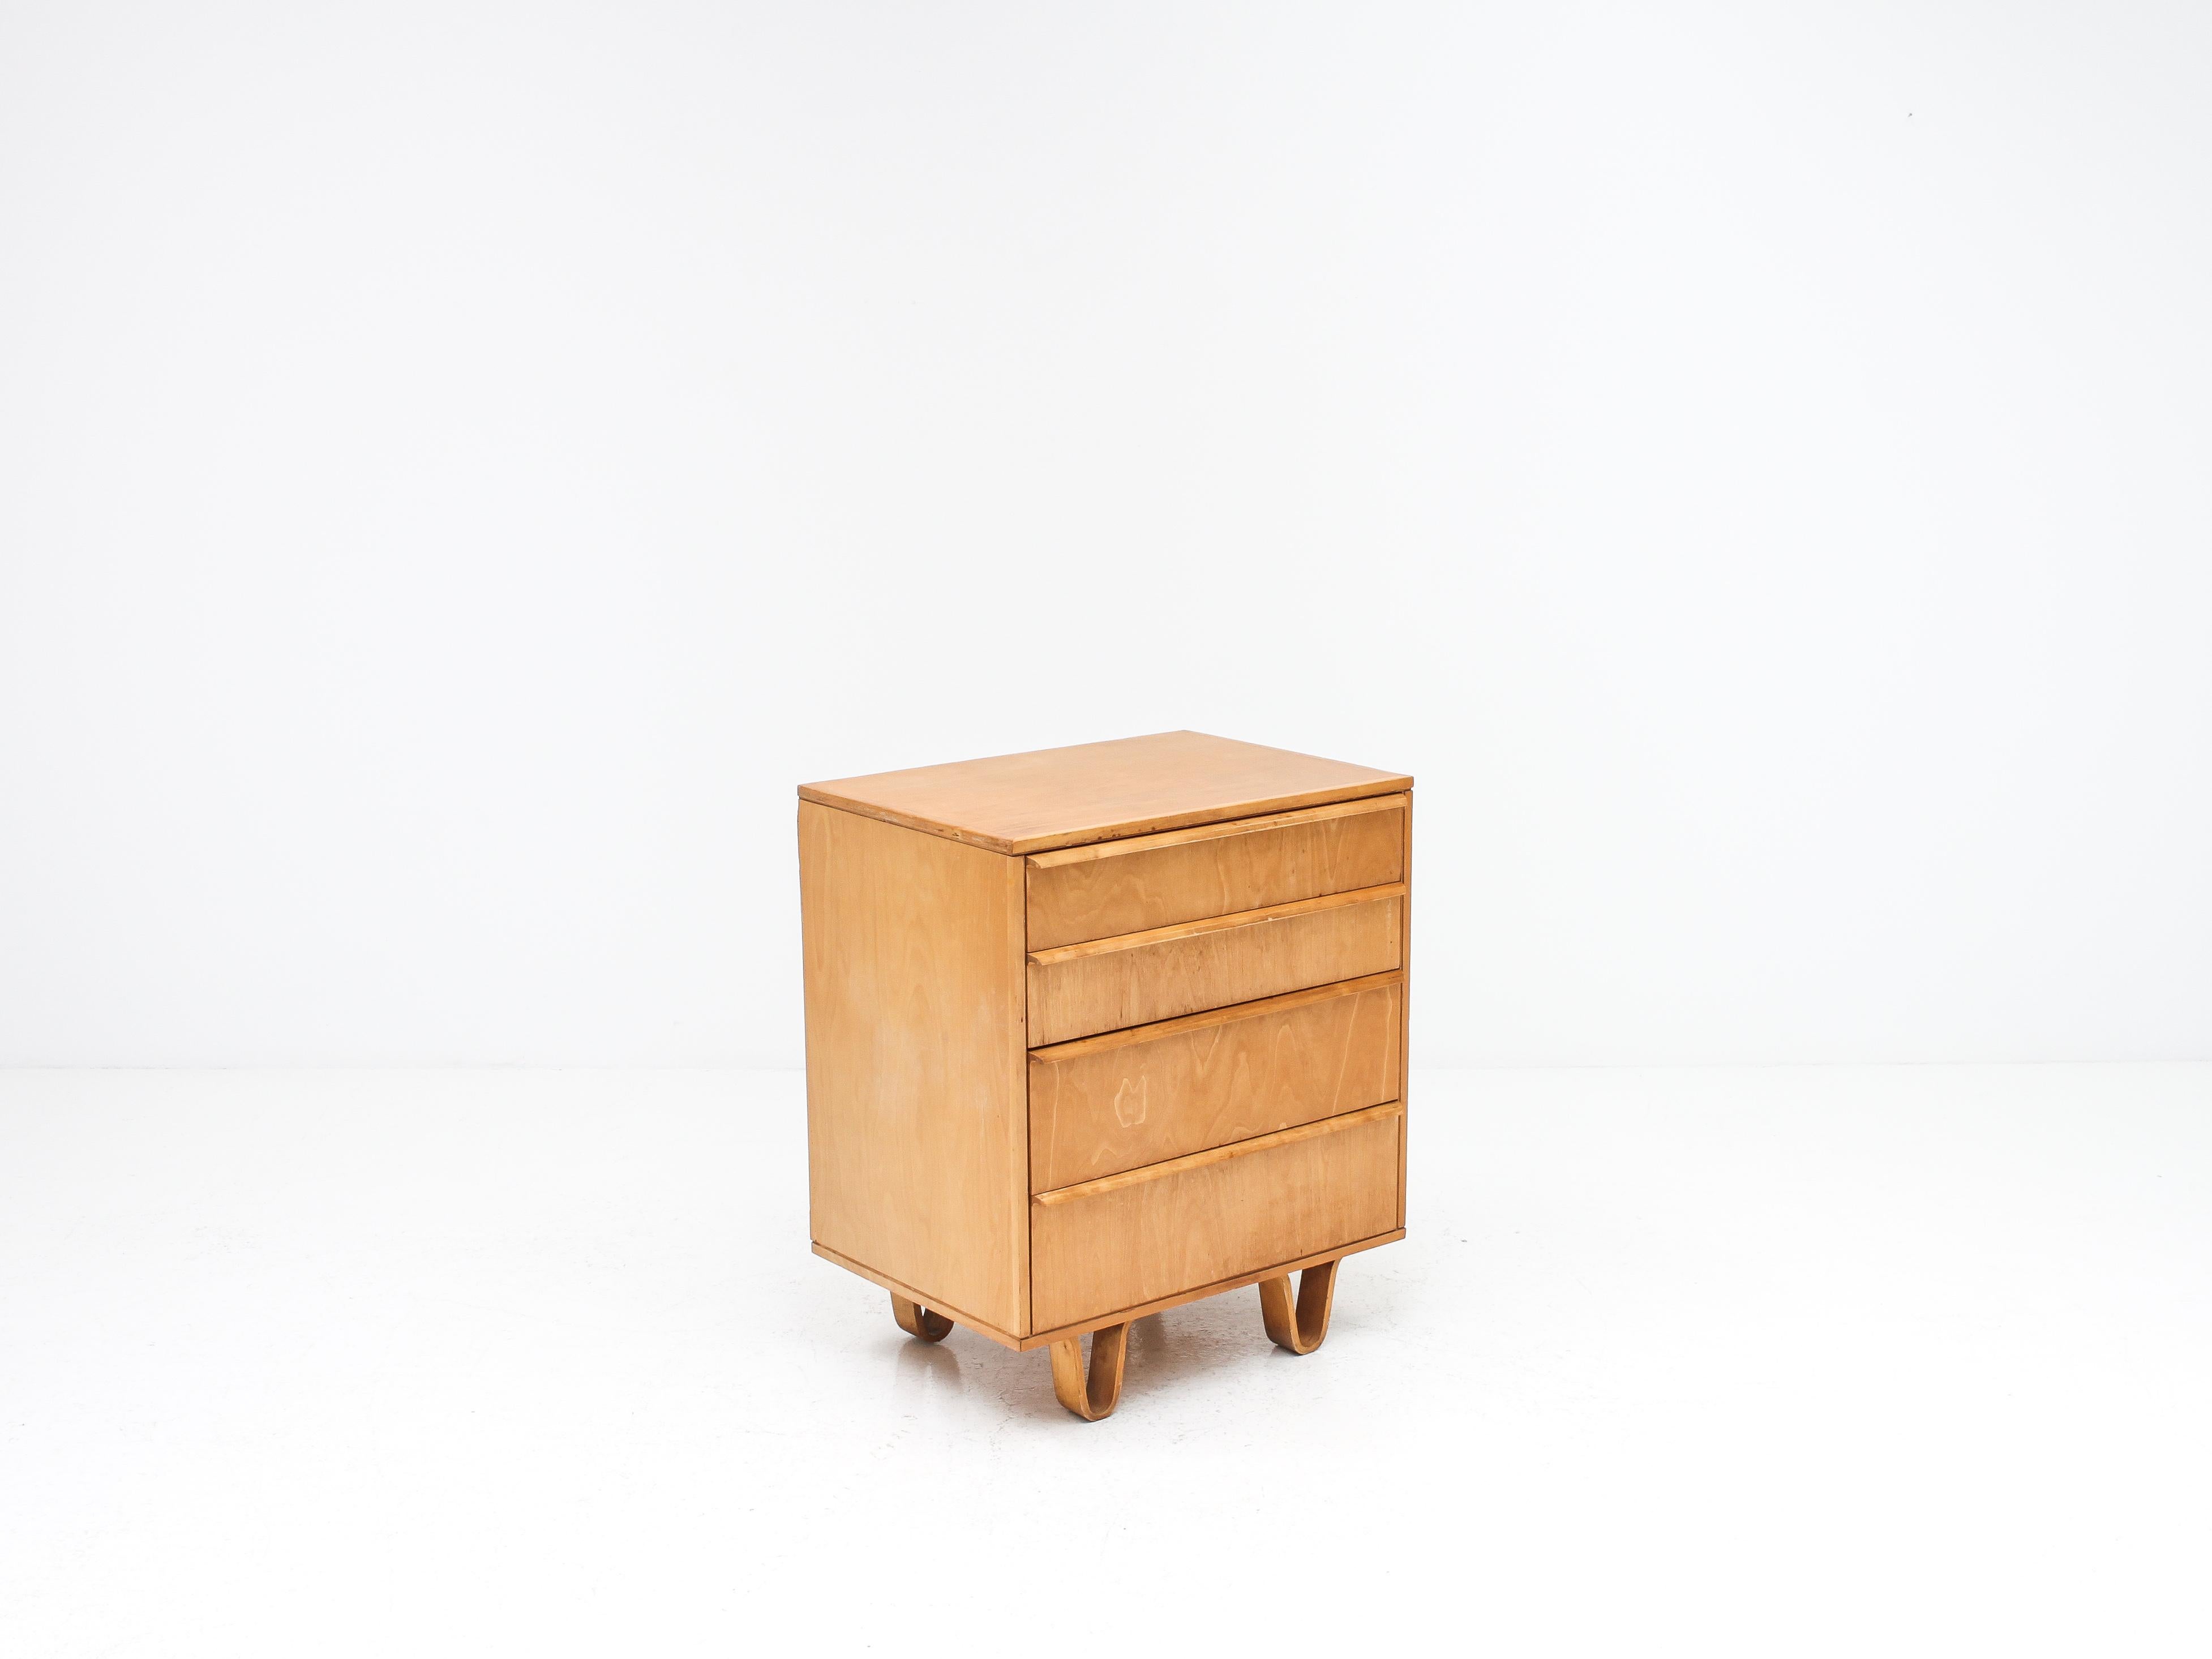 Cees Braakman CB05 Birch Chest of Drawers for UMS Pastoe, 1952, Netherlands In Good Condition For Sale In London Road, Baldock, Hertfordshire